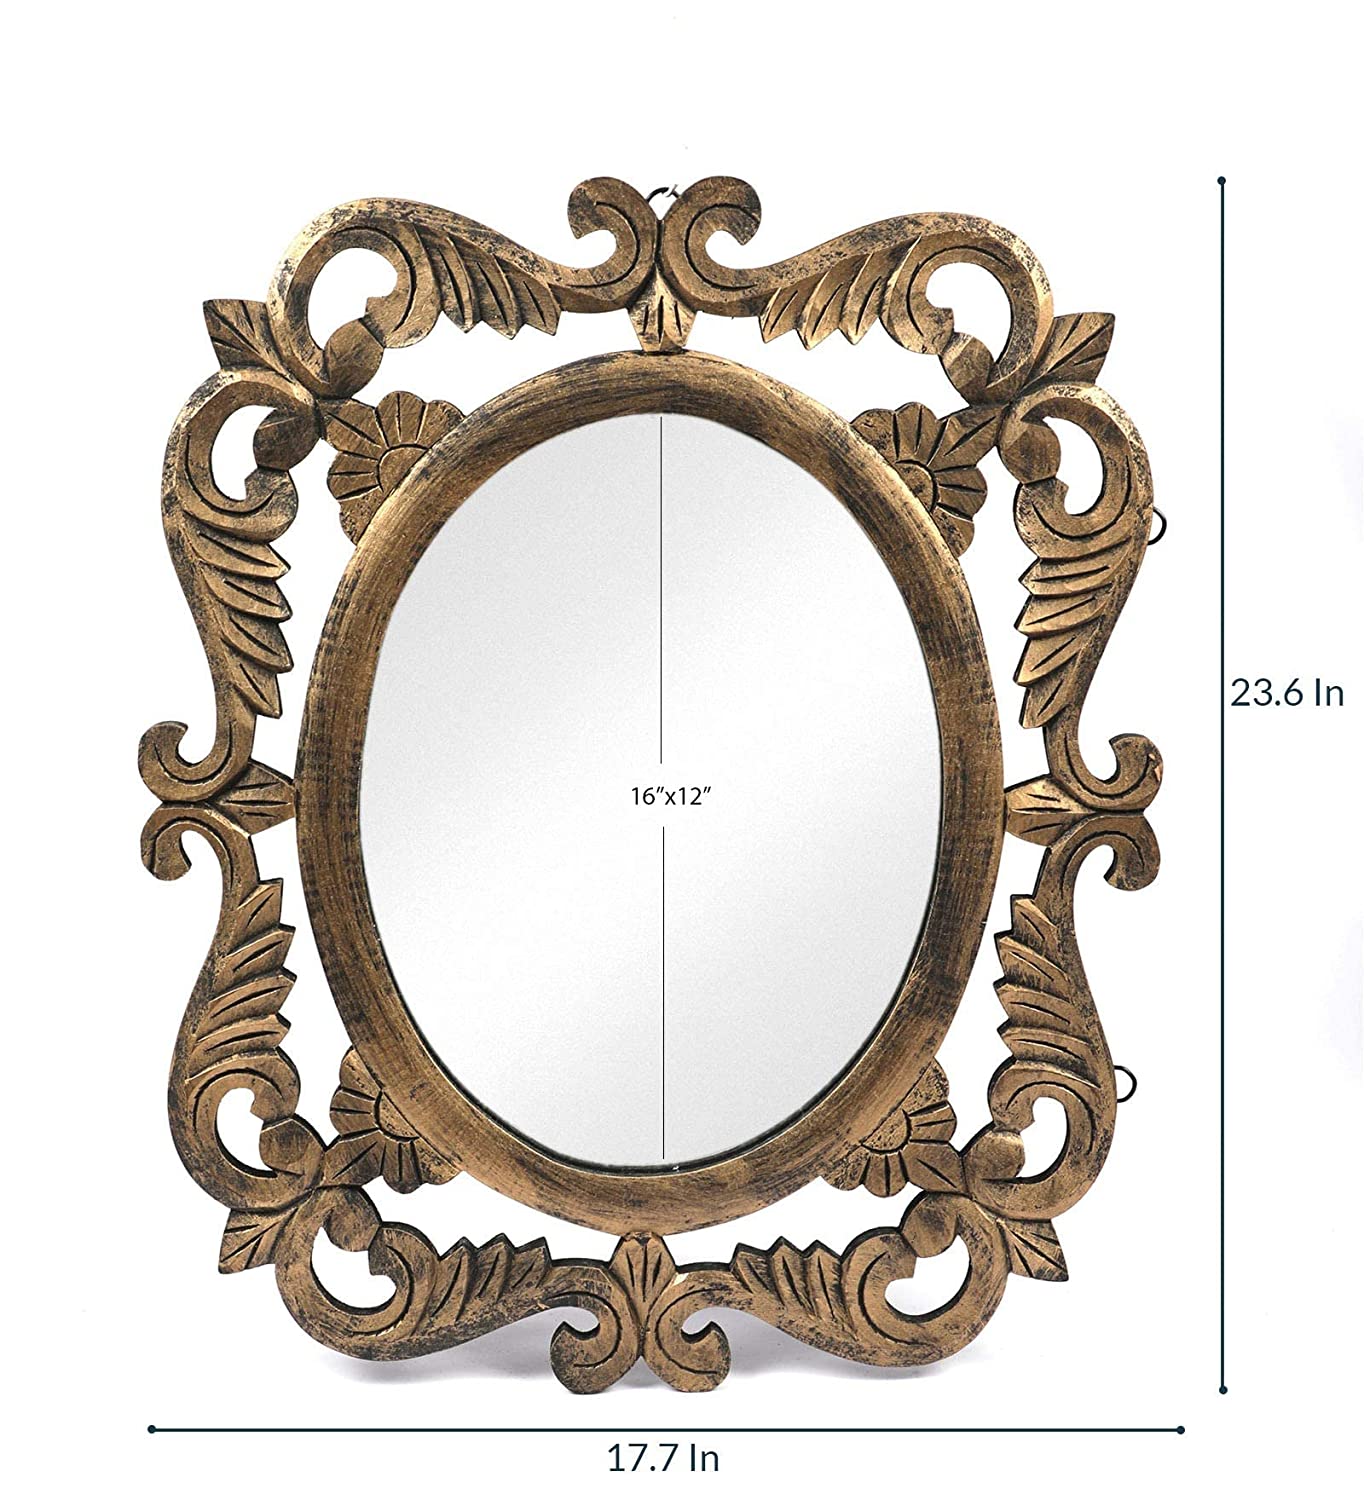 Handcrafted Wooden Wall Mirror for Home Décor (50 cm x 2 cm x 60 cm, Gold)